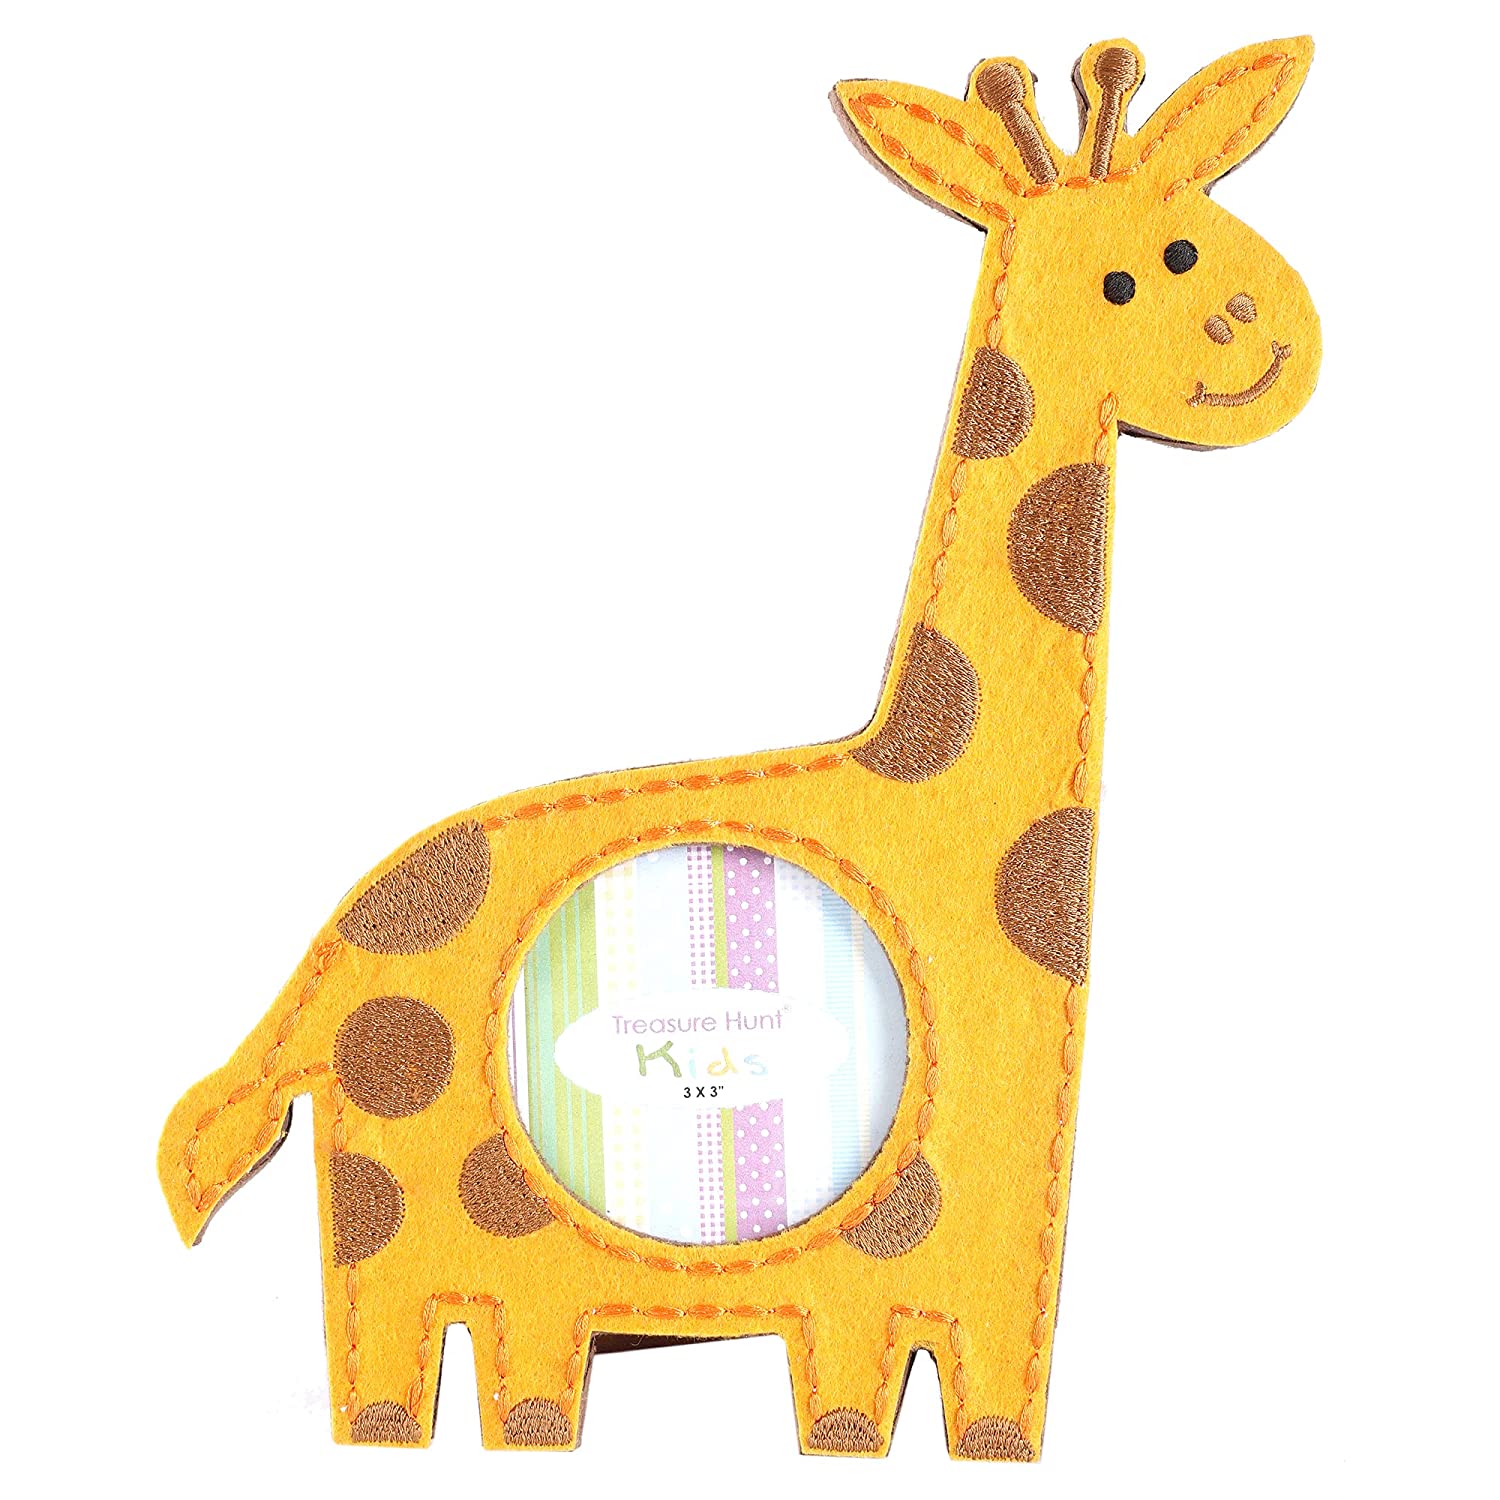 Treasure Hunt® GIRAFFE Shaped Handcrafted Photo Frame Table Top for Home Study Table Ideal Kids/Children | Book Bargain Buy